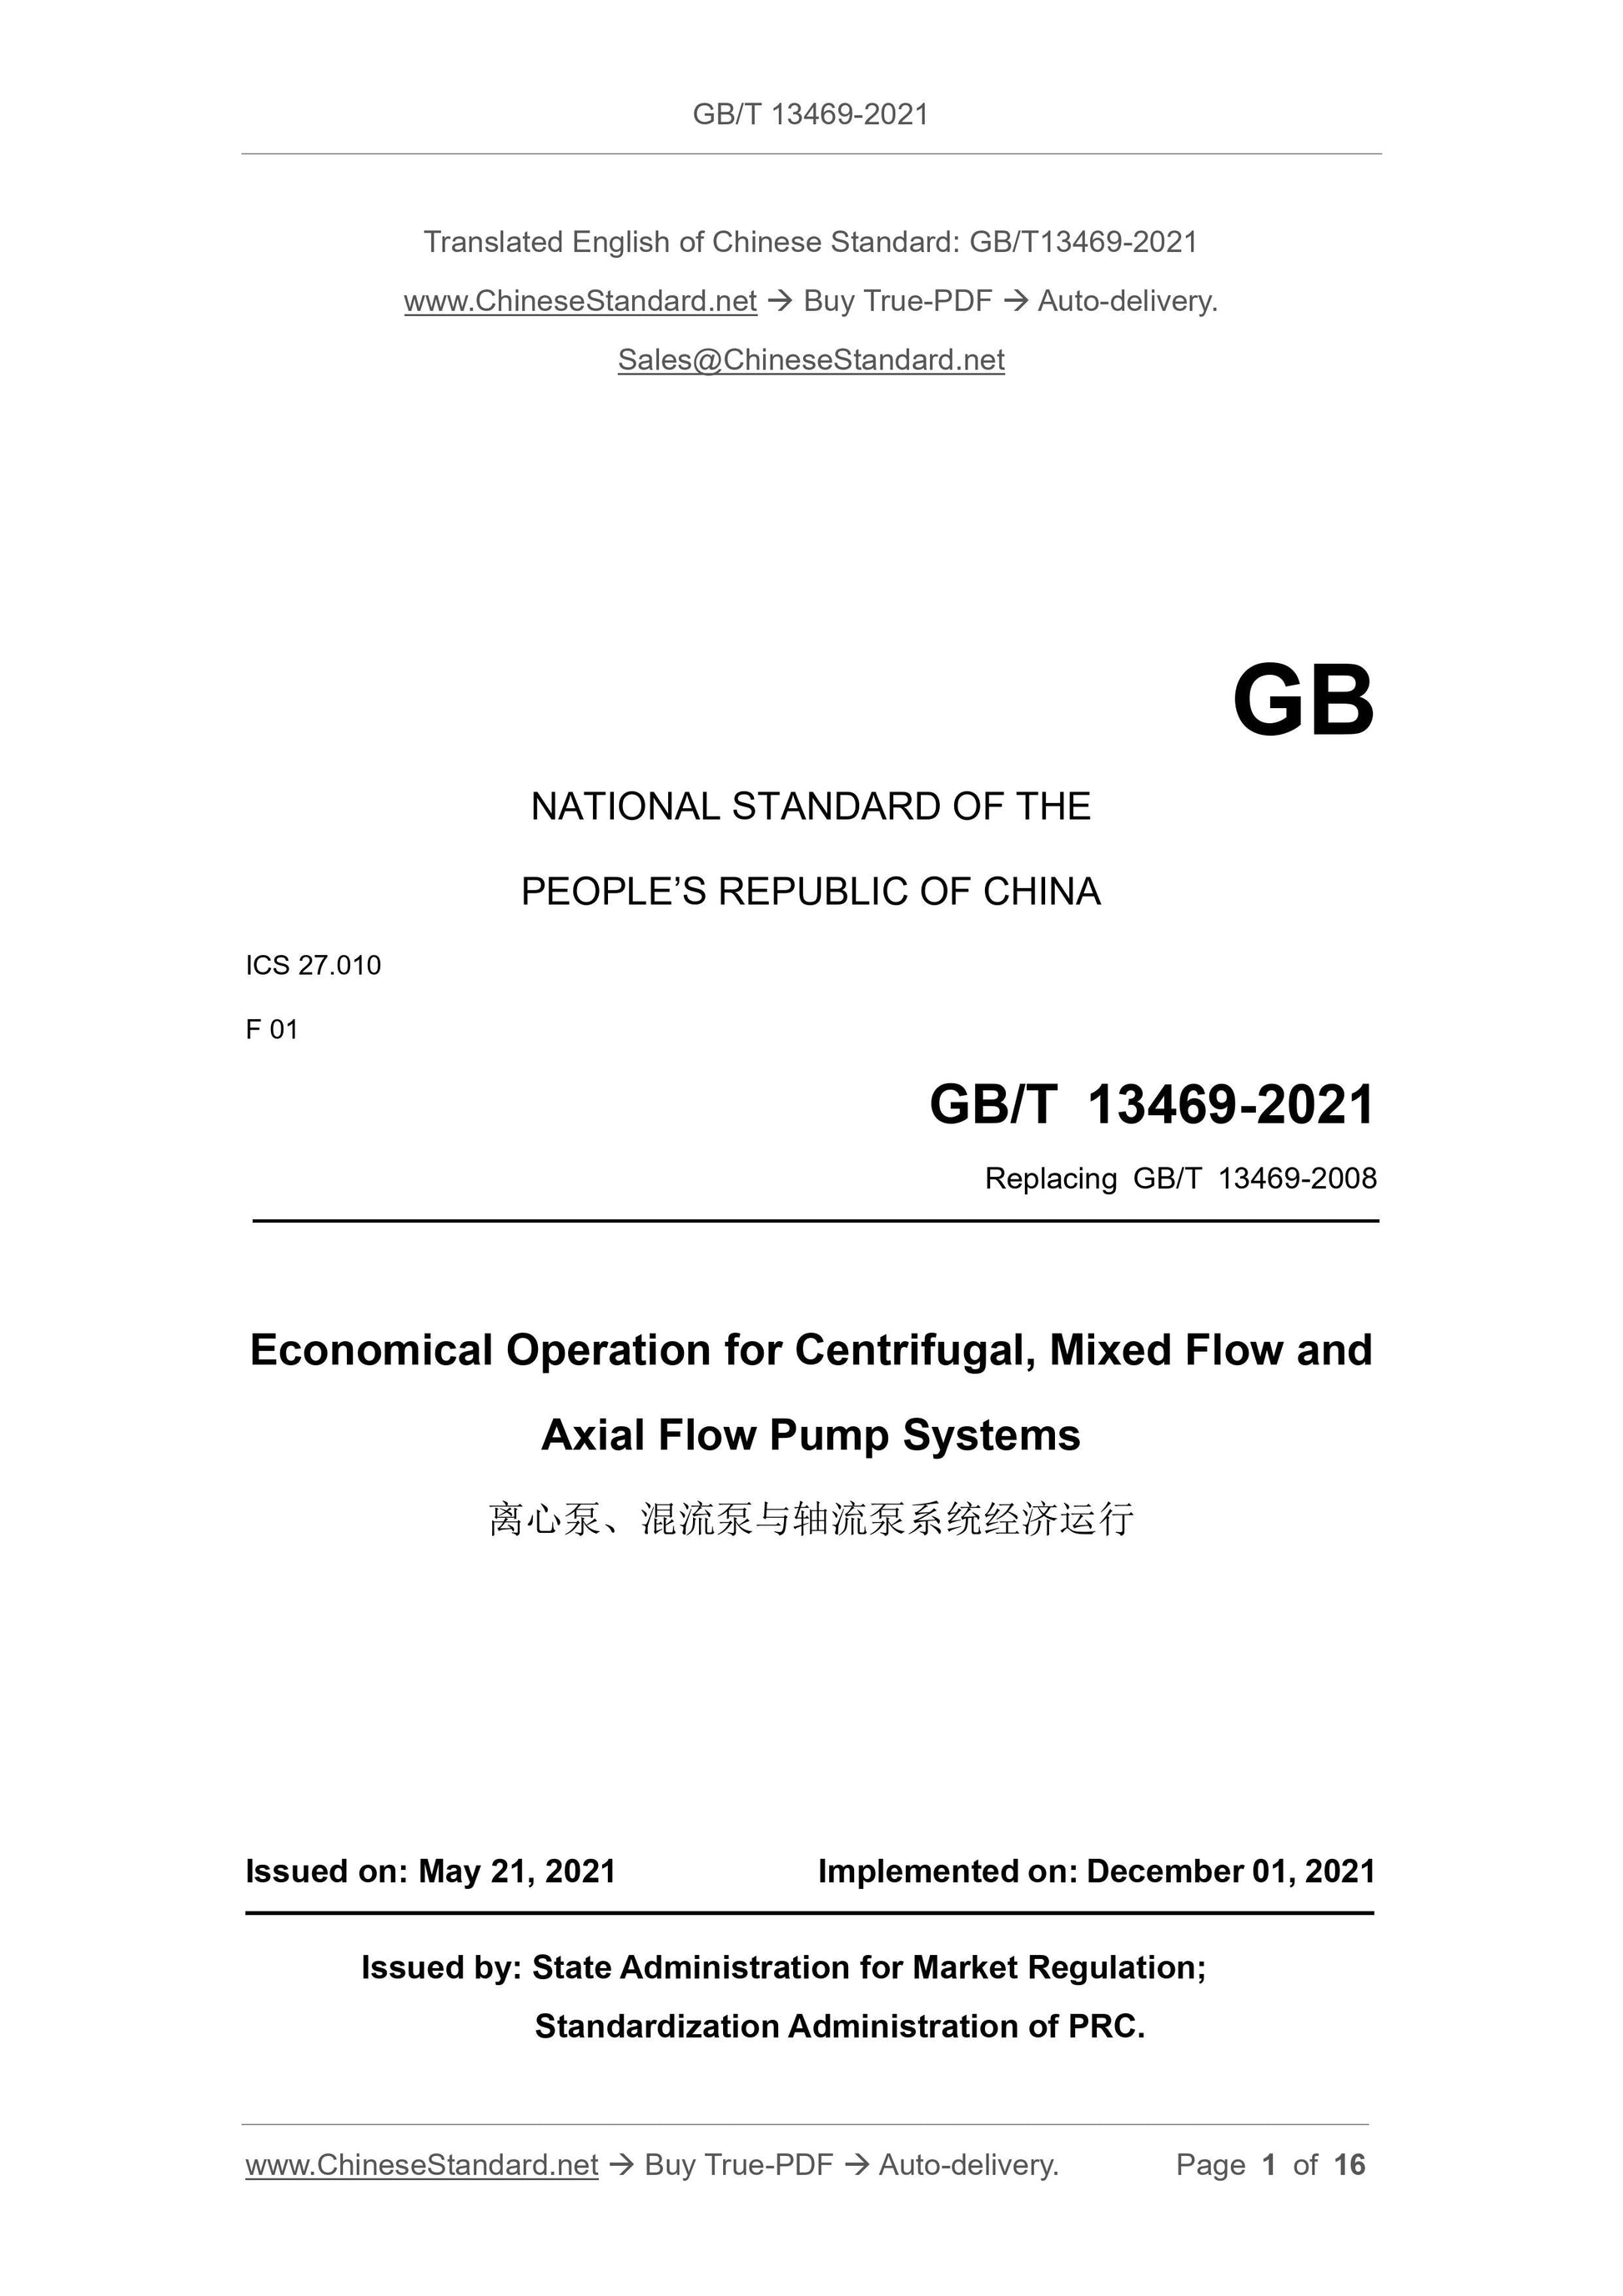 GB/T 13469-2021 Page 1